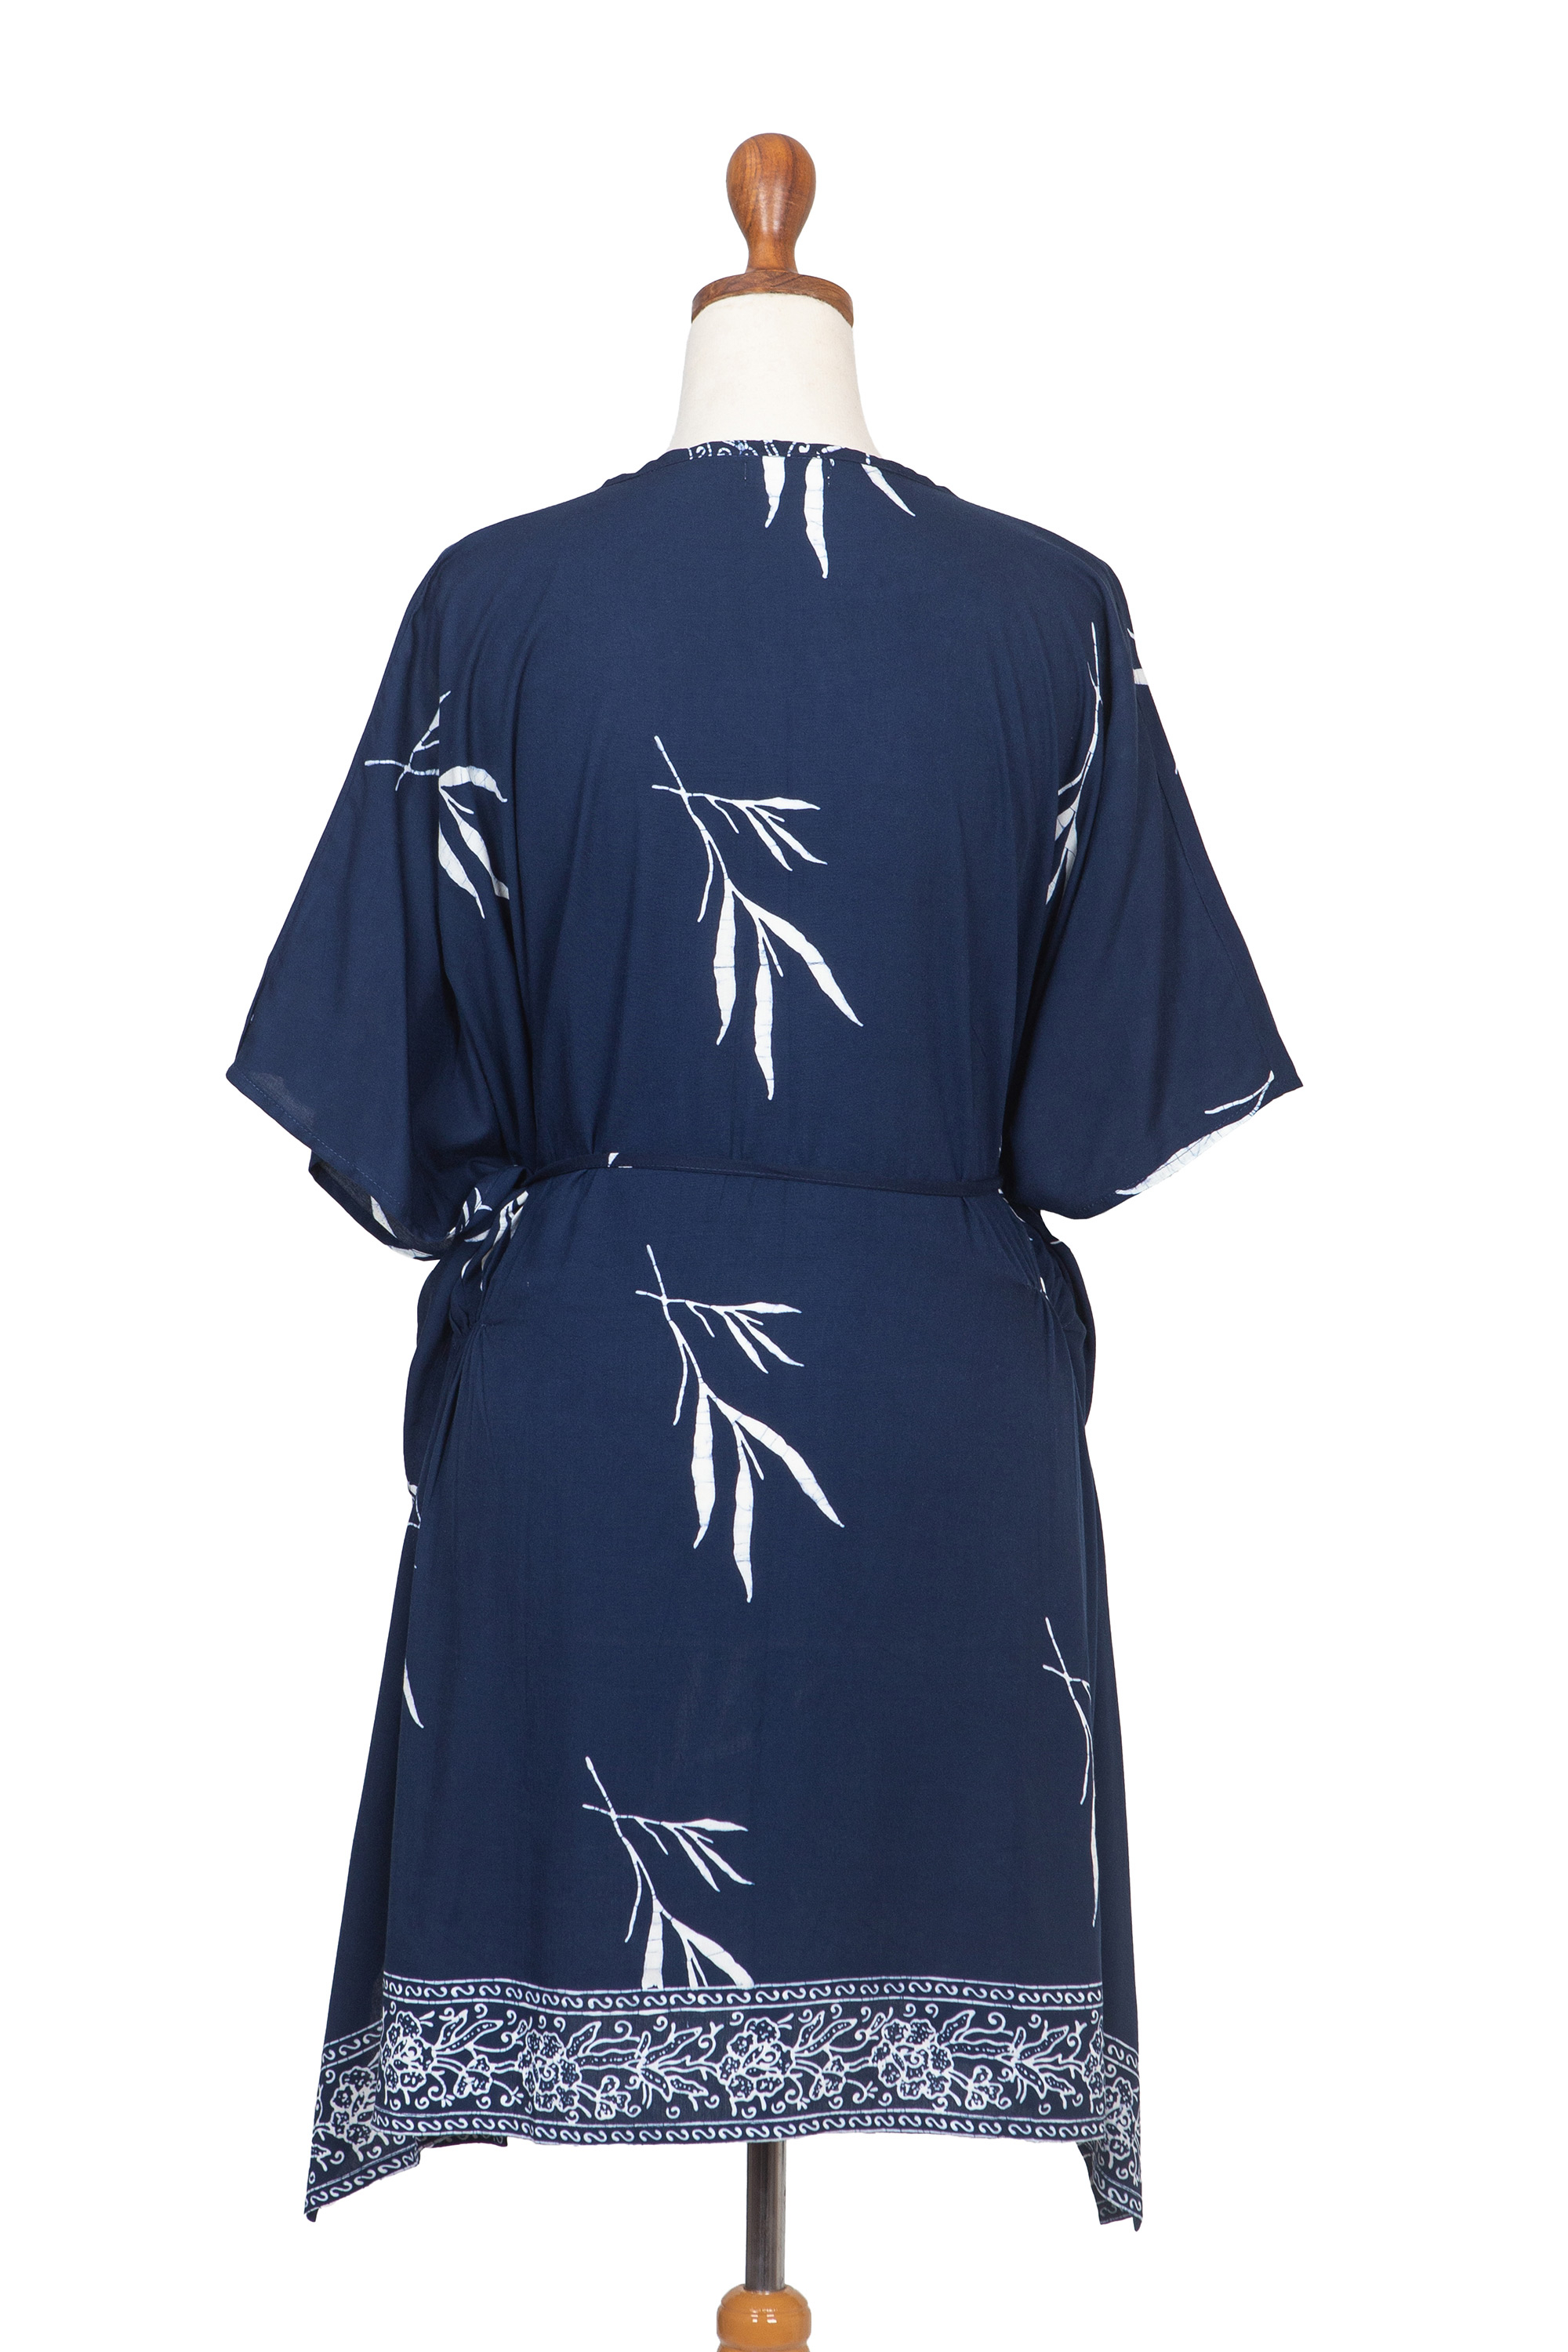 UNICEF Market | Batik Rayon Caftan in Midnight and White from Bali ...